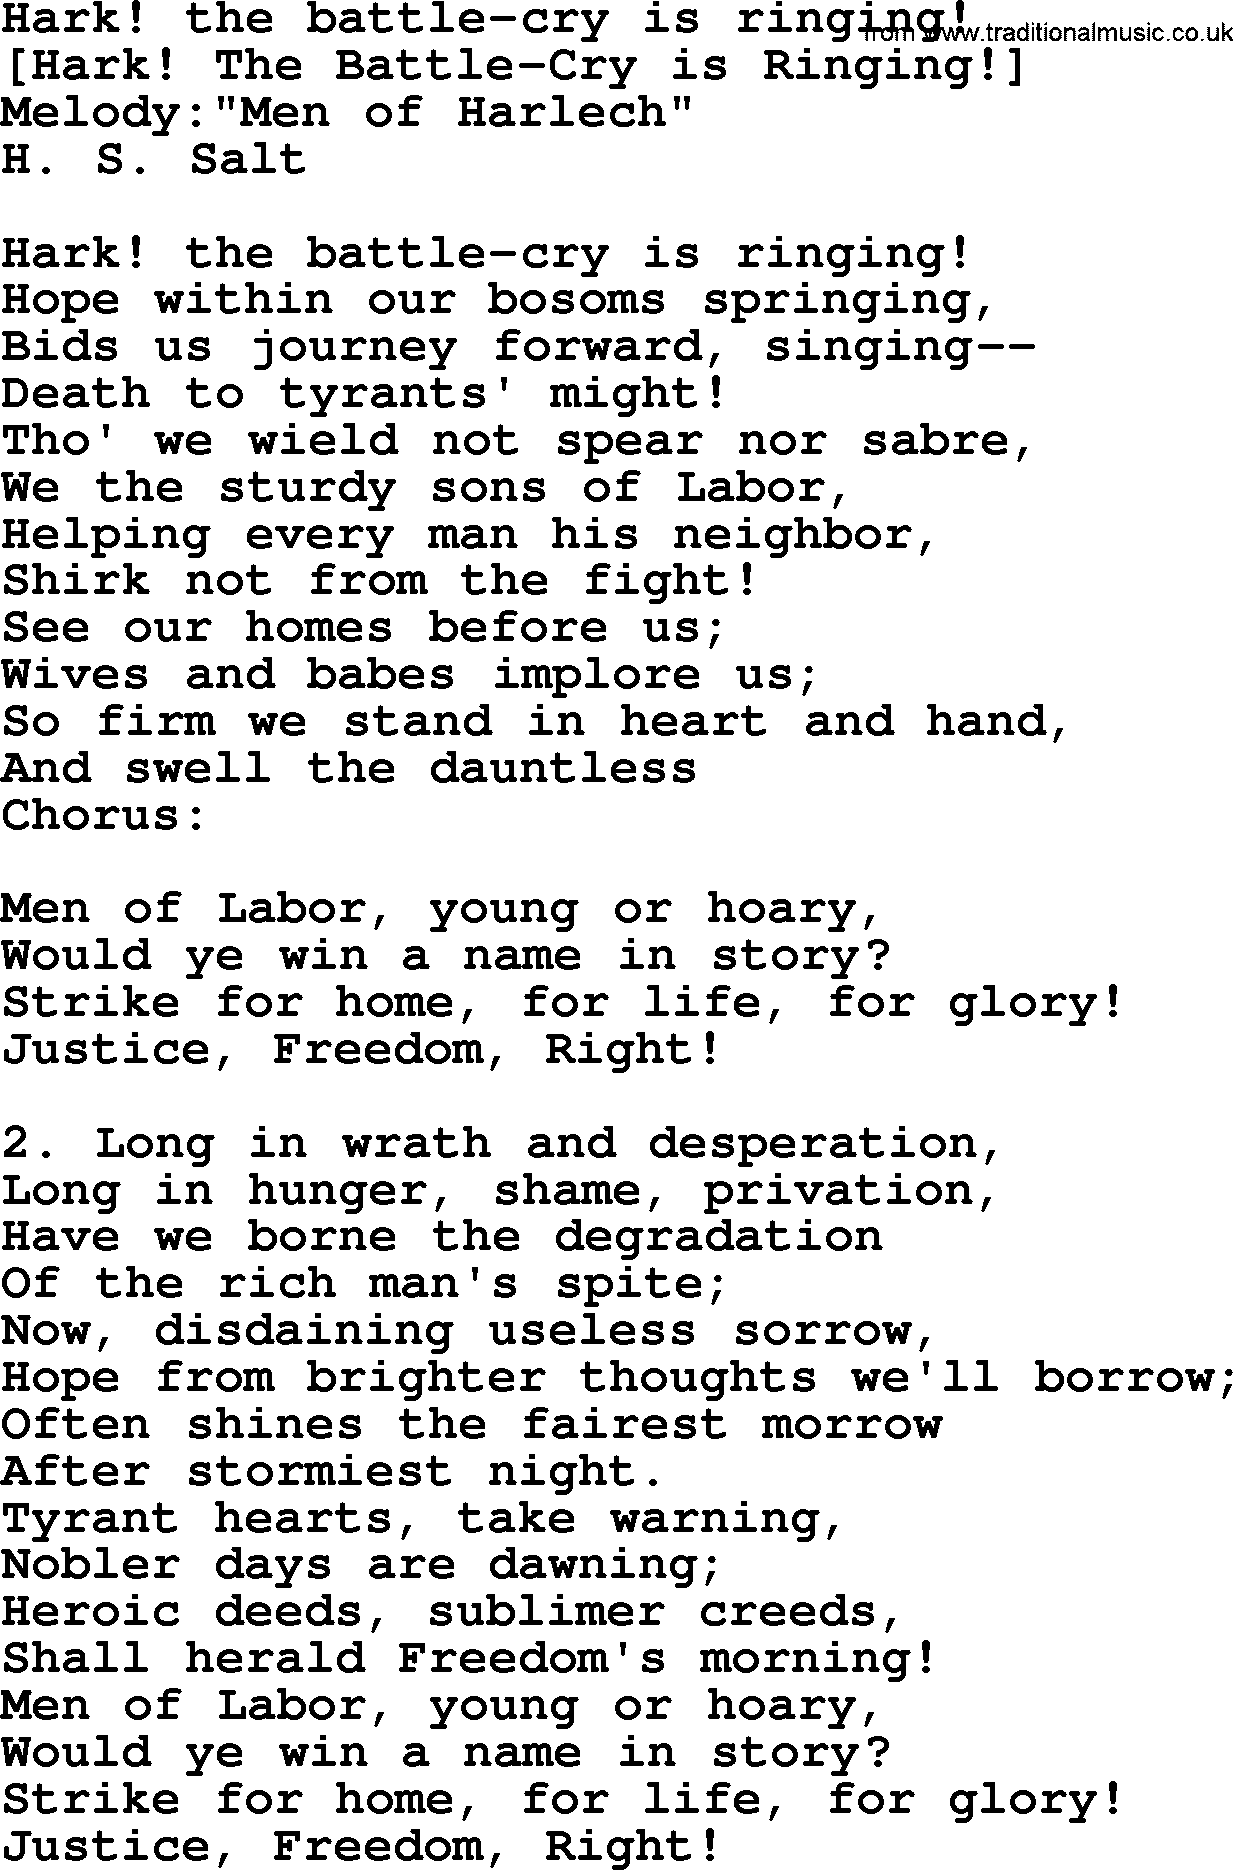 Old American Song: Hark! The Battle-Cry Is Ringing!, lyrics